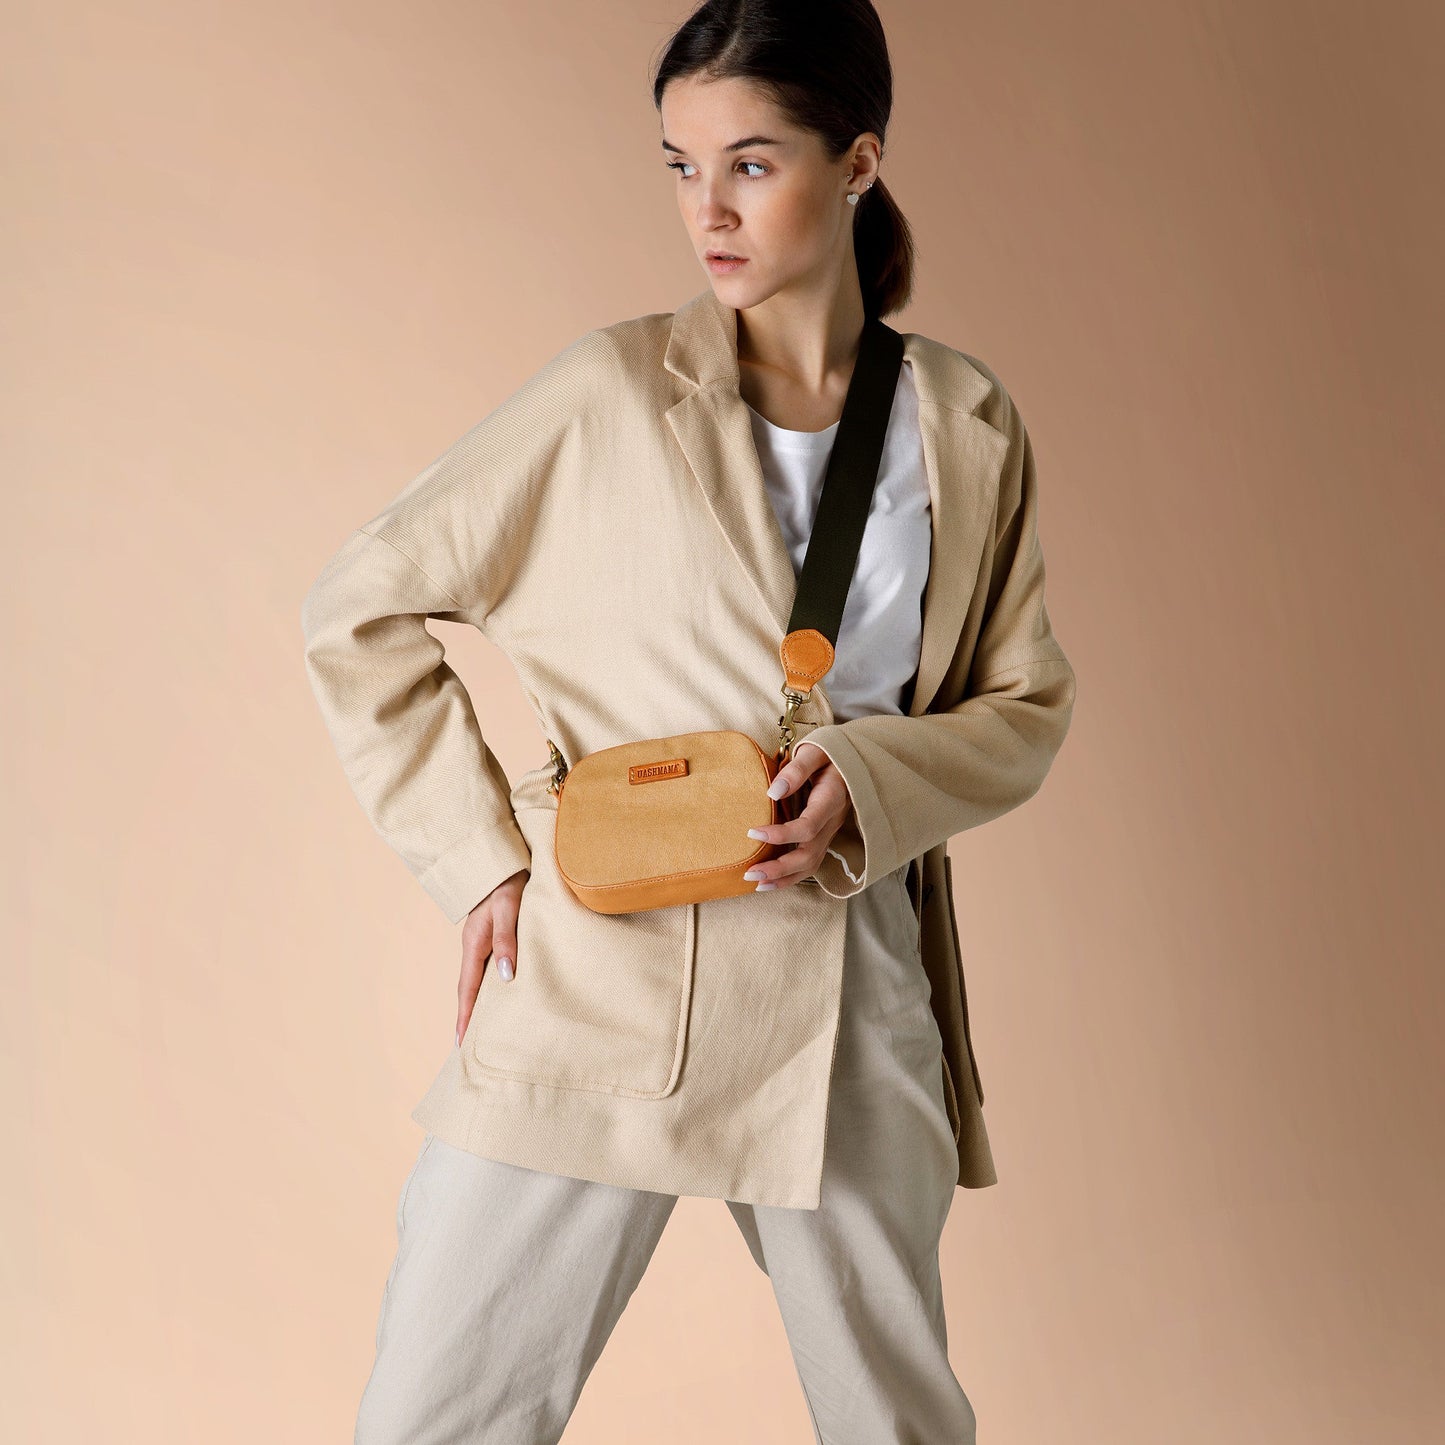 A woman stands in front of a peach-toned wall, wearing a beige blazer, white t-shirt and chinos. Across her body is a tan coloured washable paper bag with a dark cotton canvas strap.